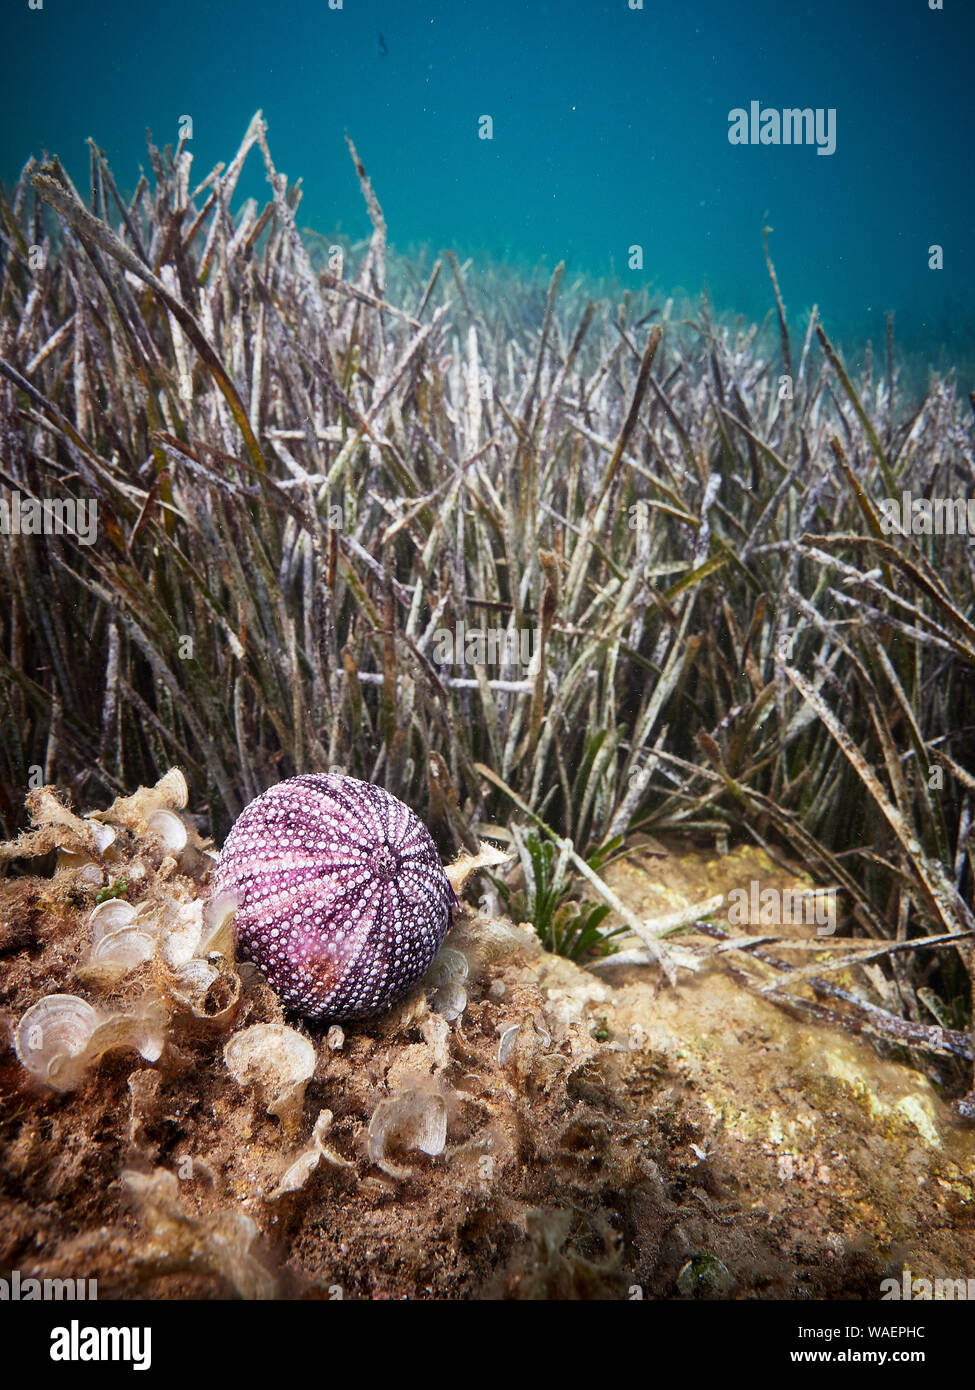 Seabed with an urchin shell Stock Photo